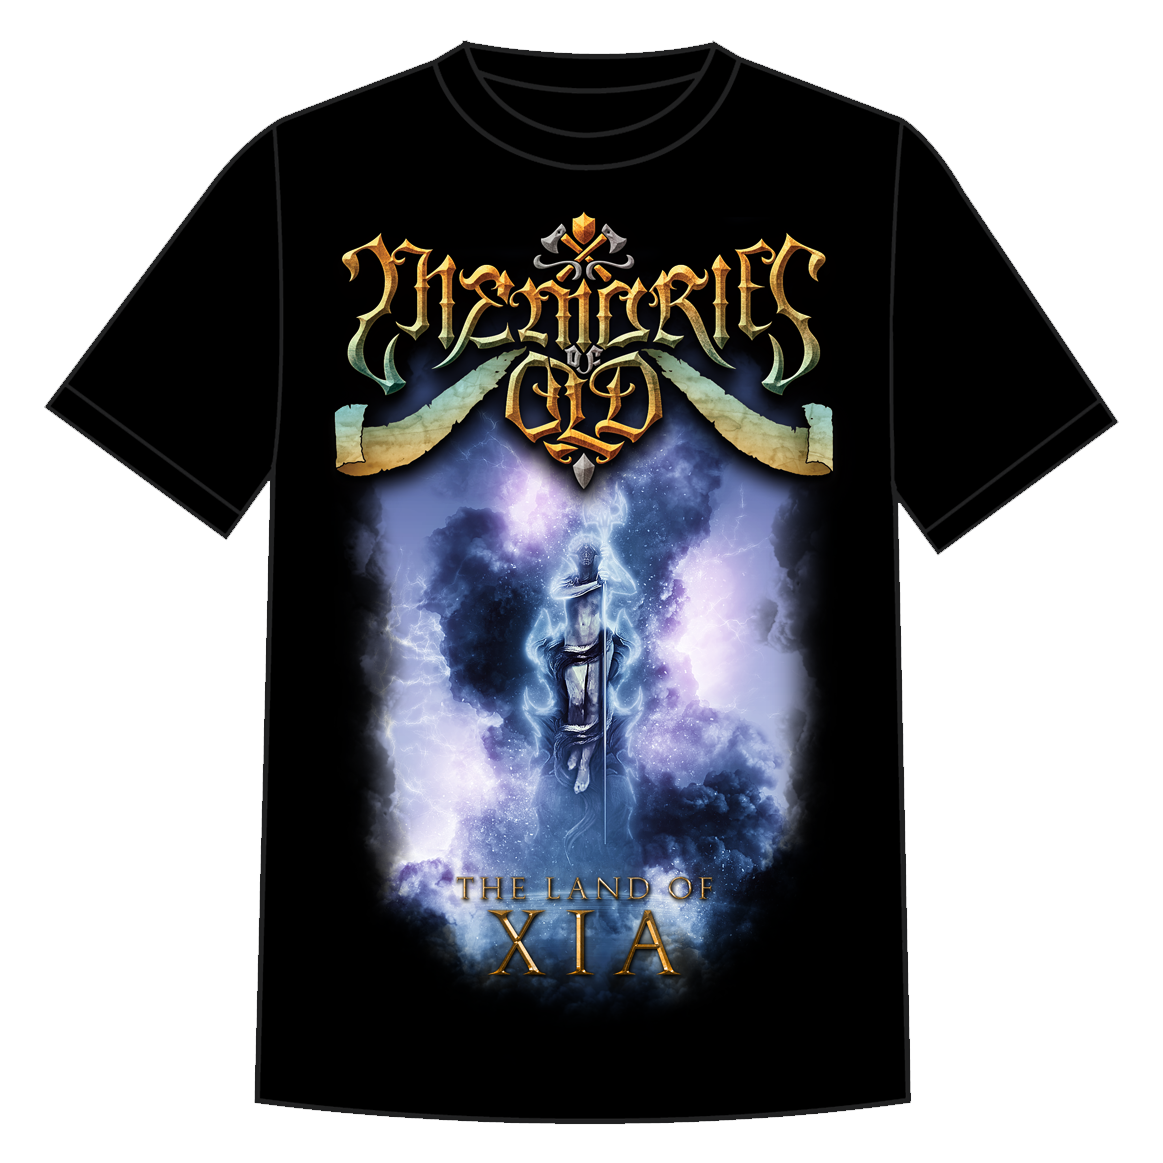 MEMORIES OF OLD - The Land Of Xia T-Shirt size XL